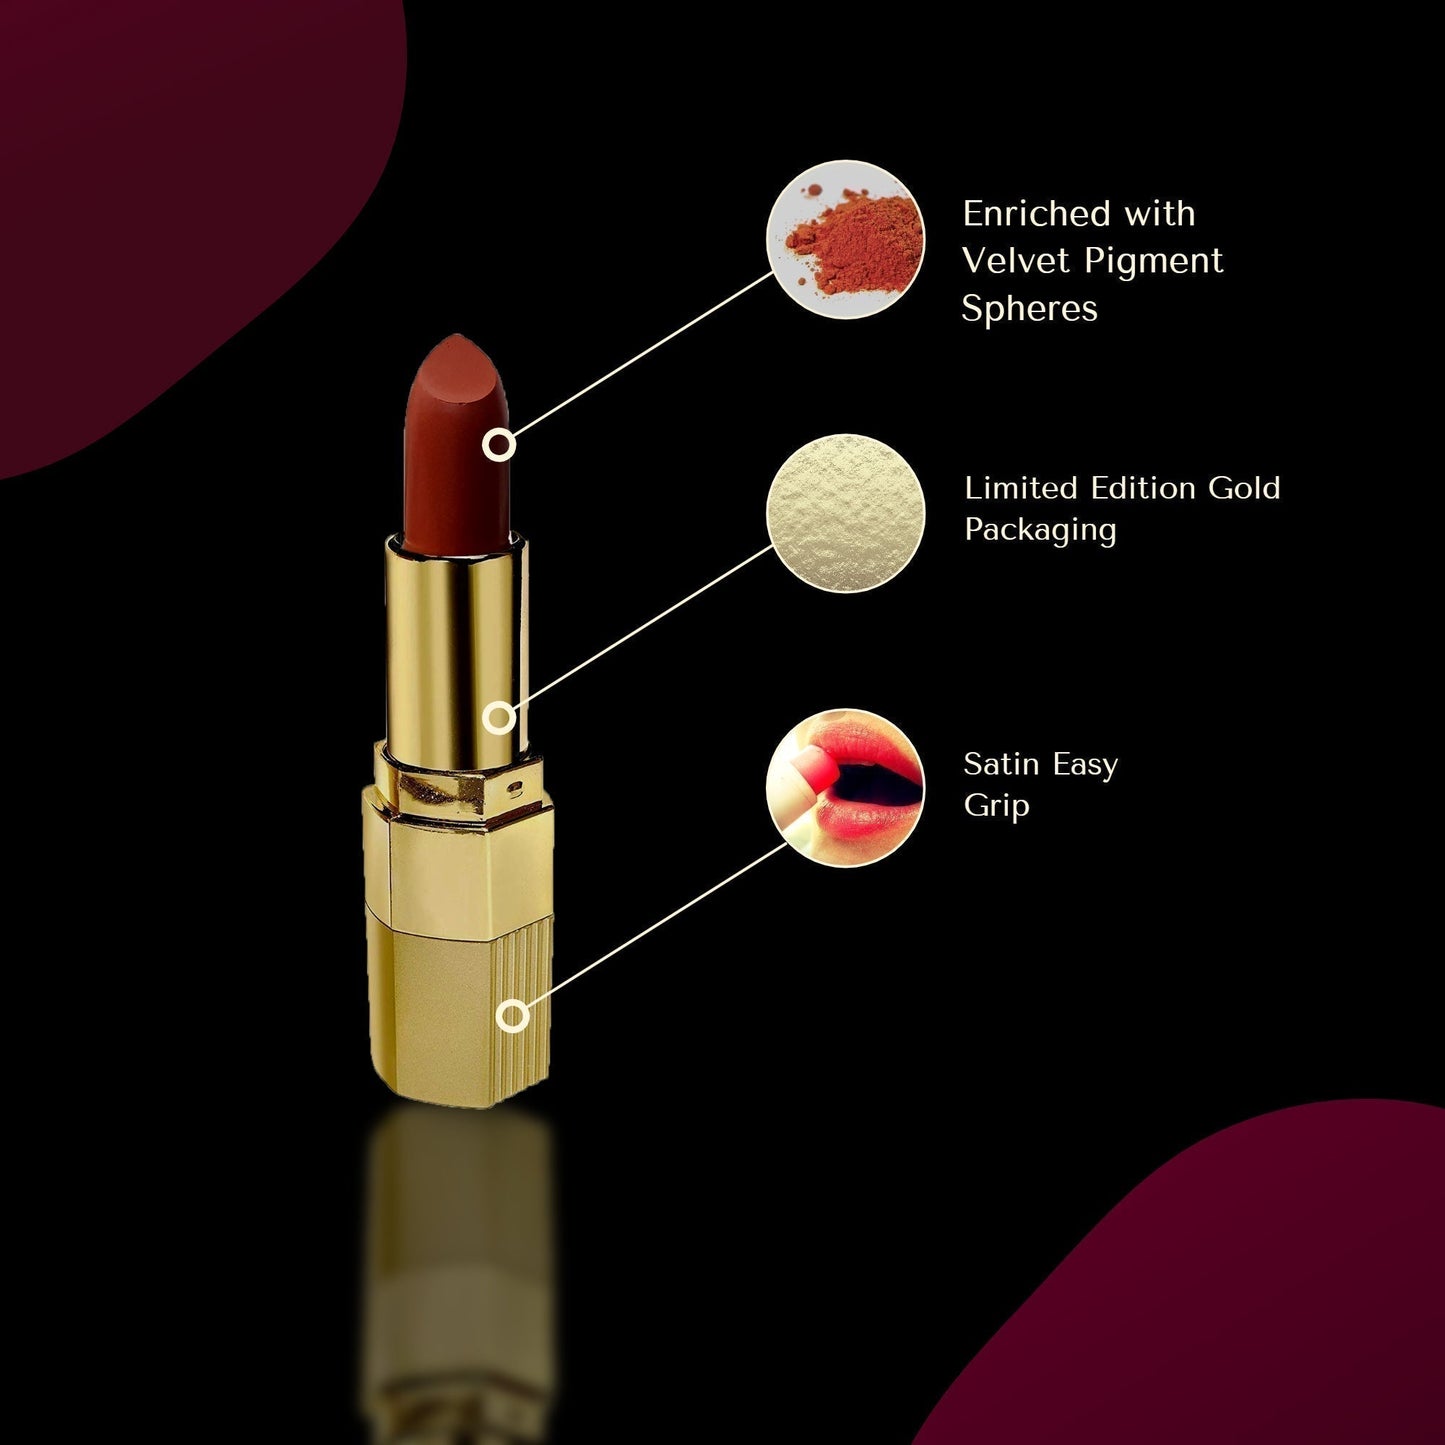 Krayons Desire Matte Lipstick, Highly Pigmented, Longlasting, 3.5g Each, Combo, Pack of 2 (Pink Mulbery, Nude Caramel)